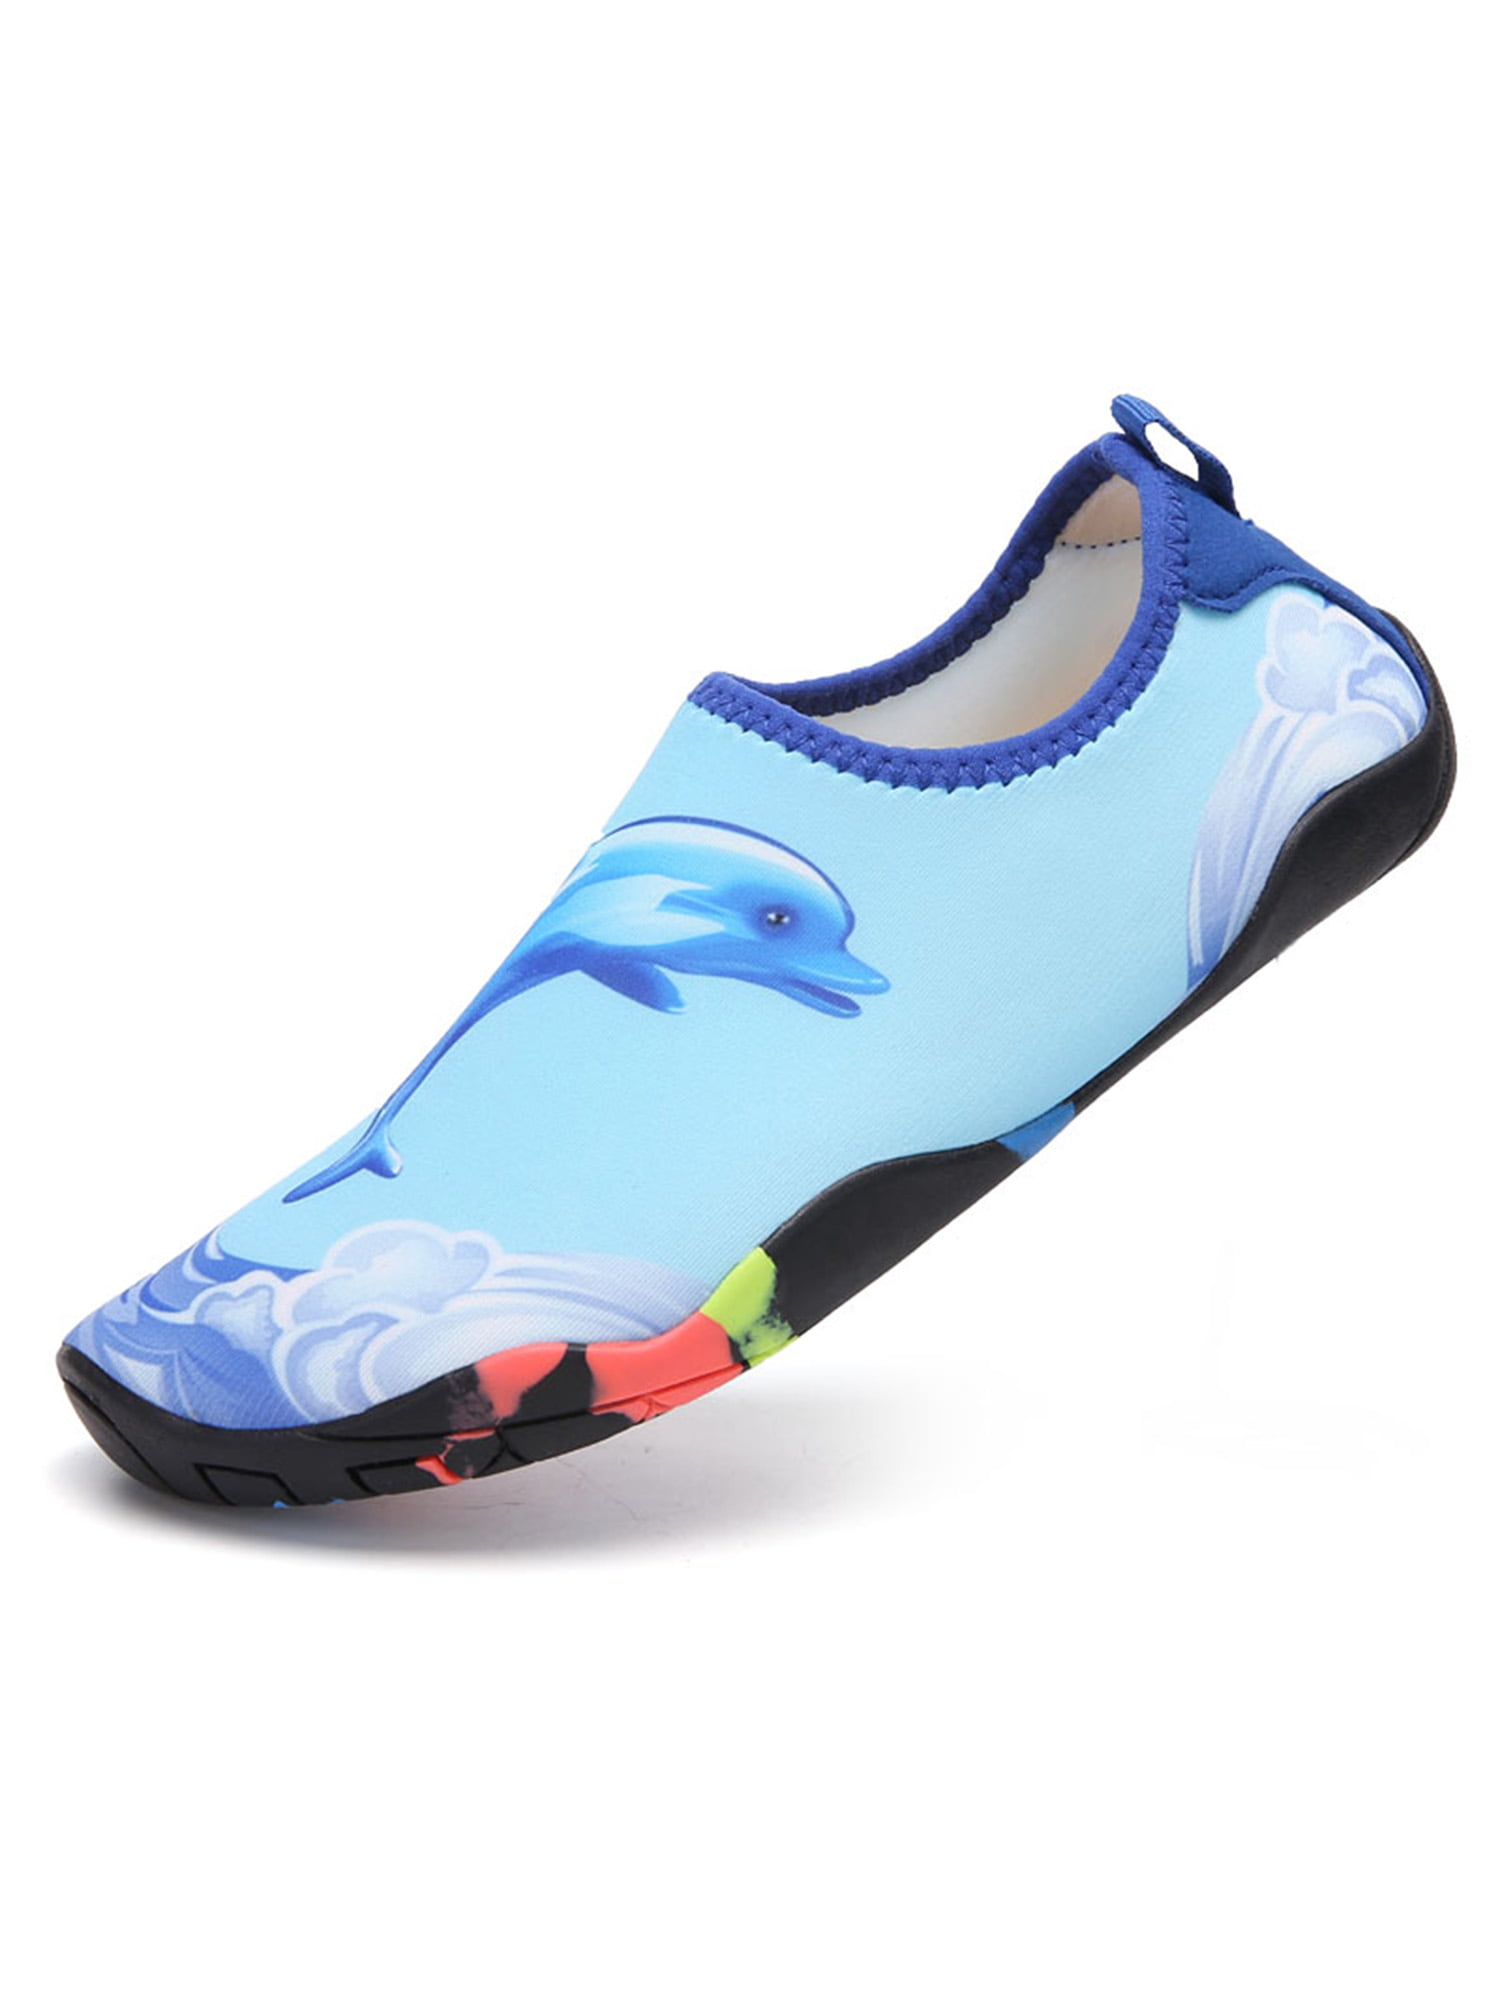 Unisex Aqua Shoes Wet Boots Kids Adults Size Beach Surf Water Foot Protection 